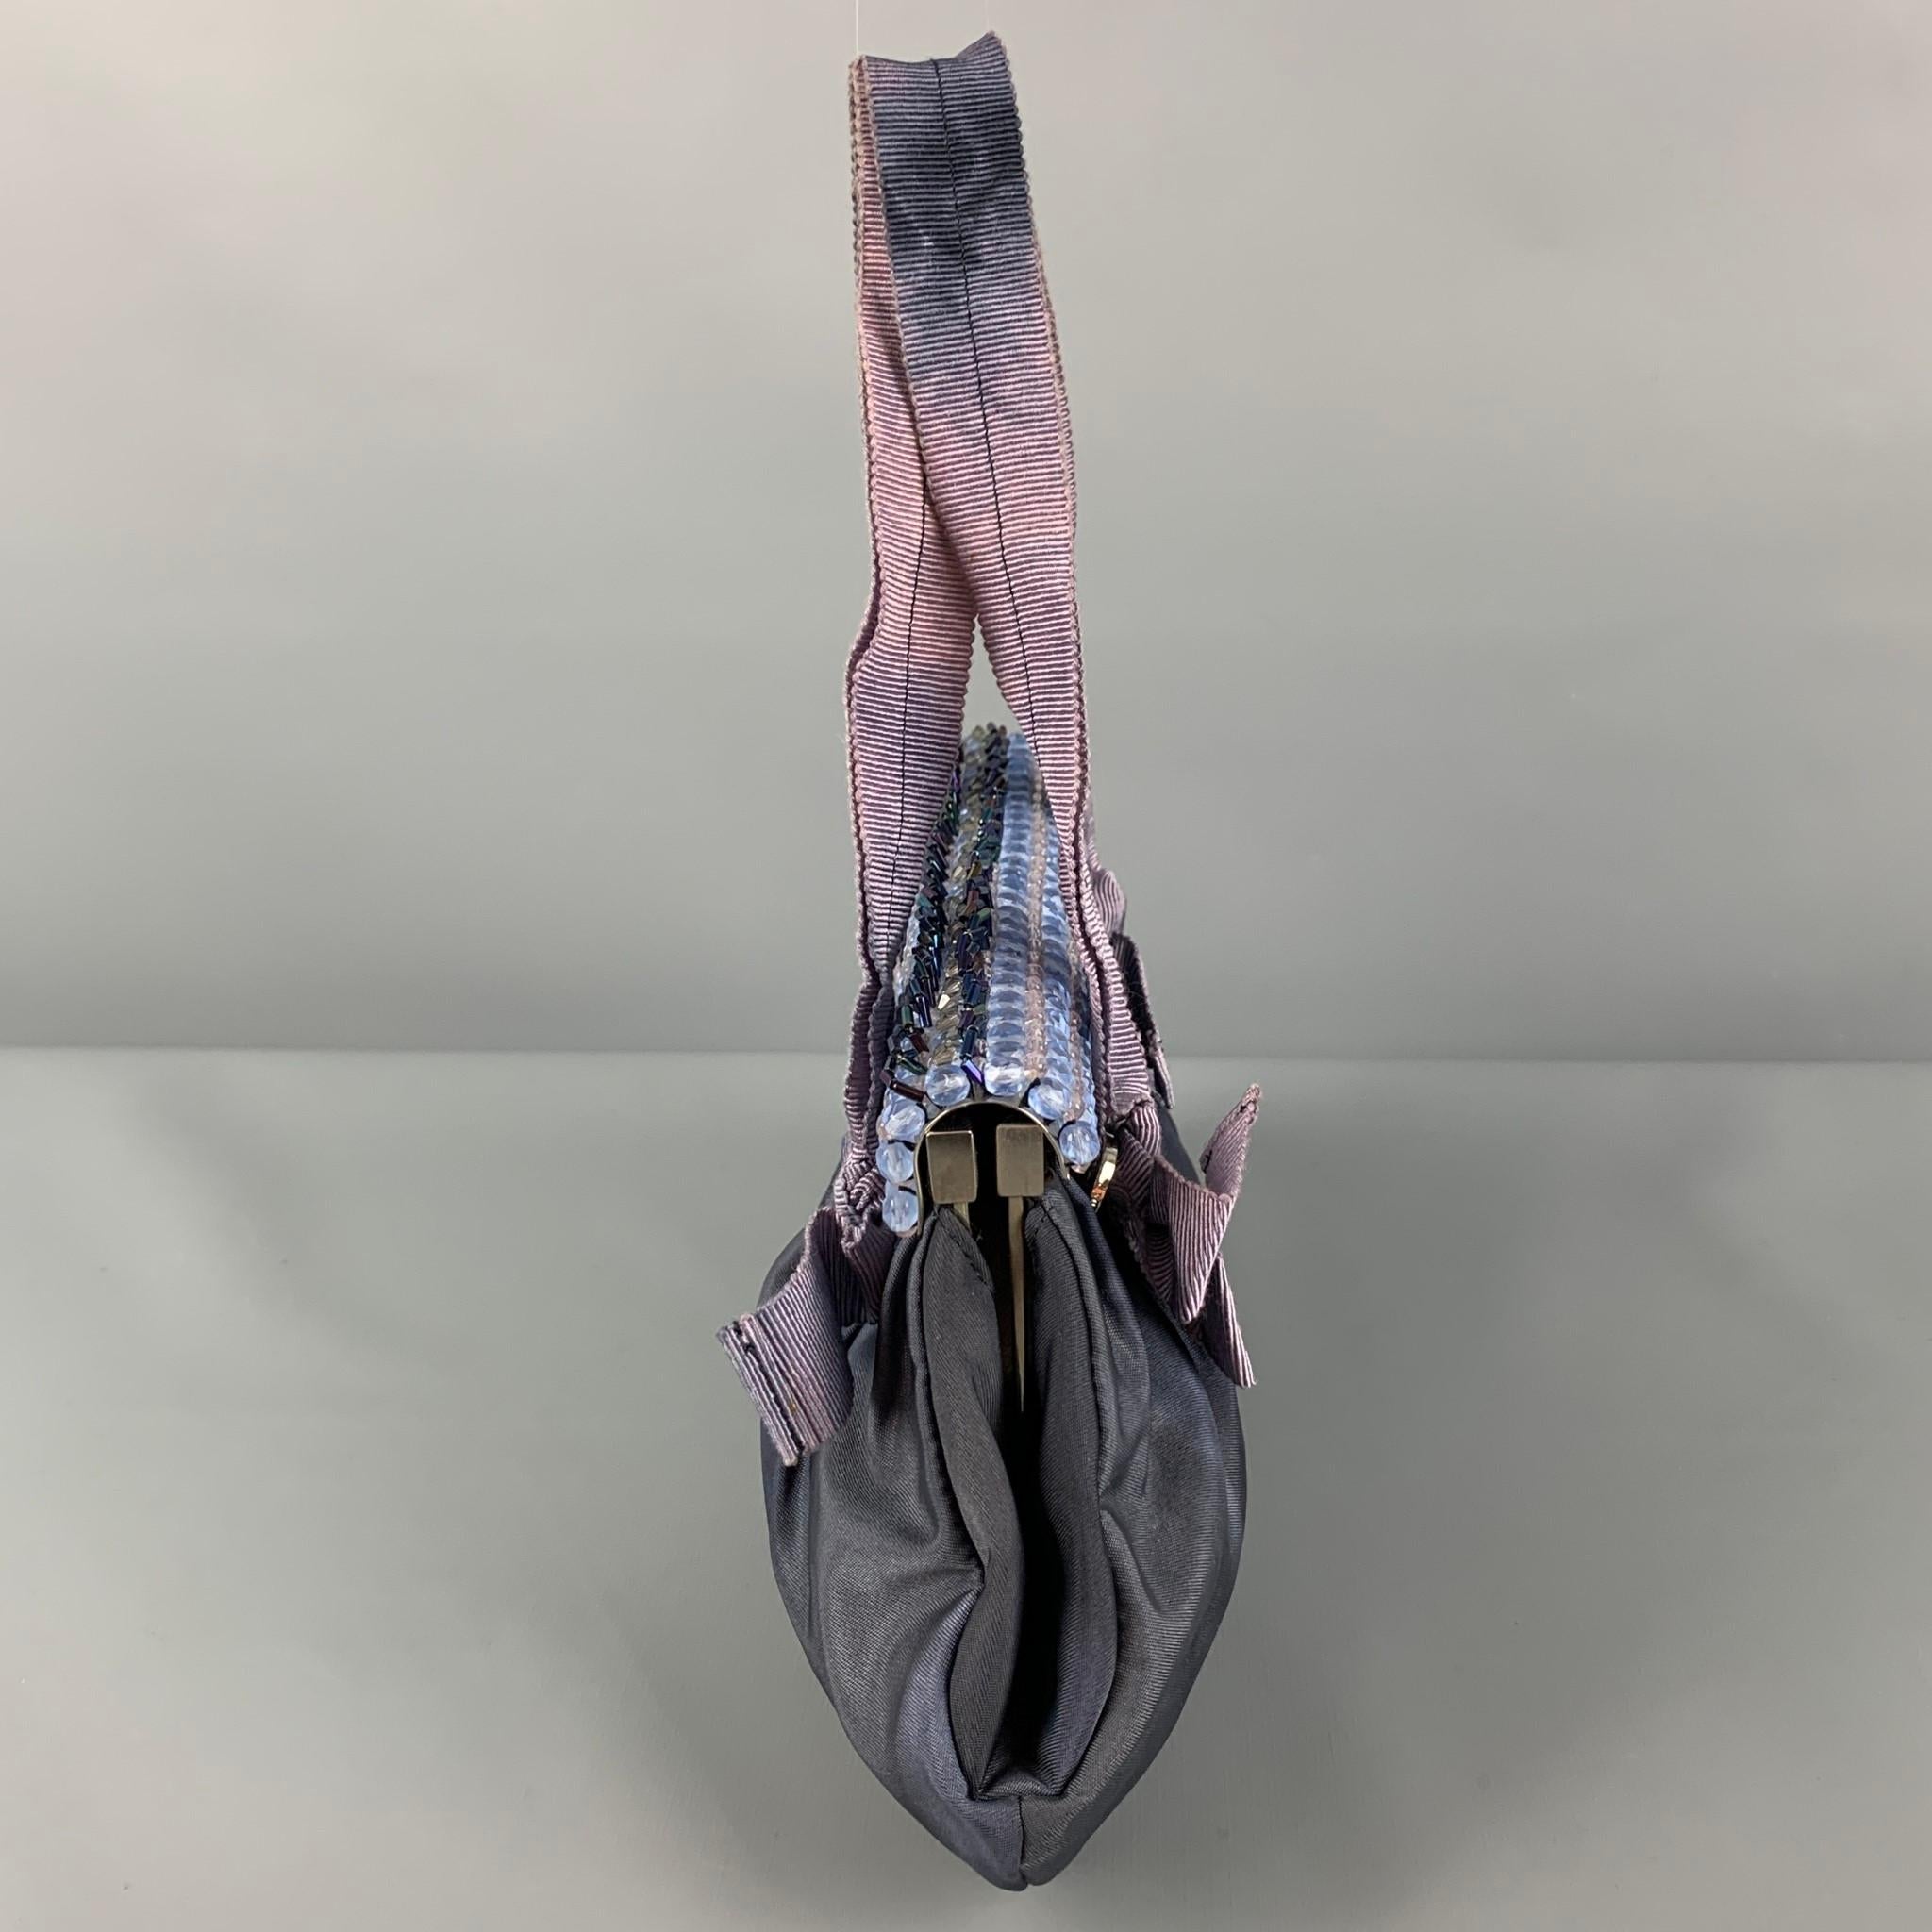 Vintage PRADA mini handbag comes in a purple marbled silk featuring a ribbon top handles, rhinestone panel design, sequin trim, logo emblem detail, inner pocket, and a magnetic closure. Made in Italy. 

Good Pre-Owned Condition.
Marked: